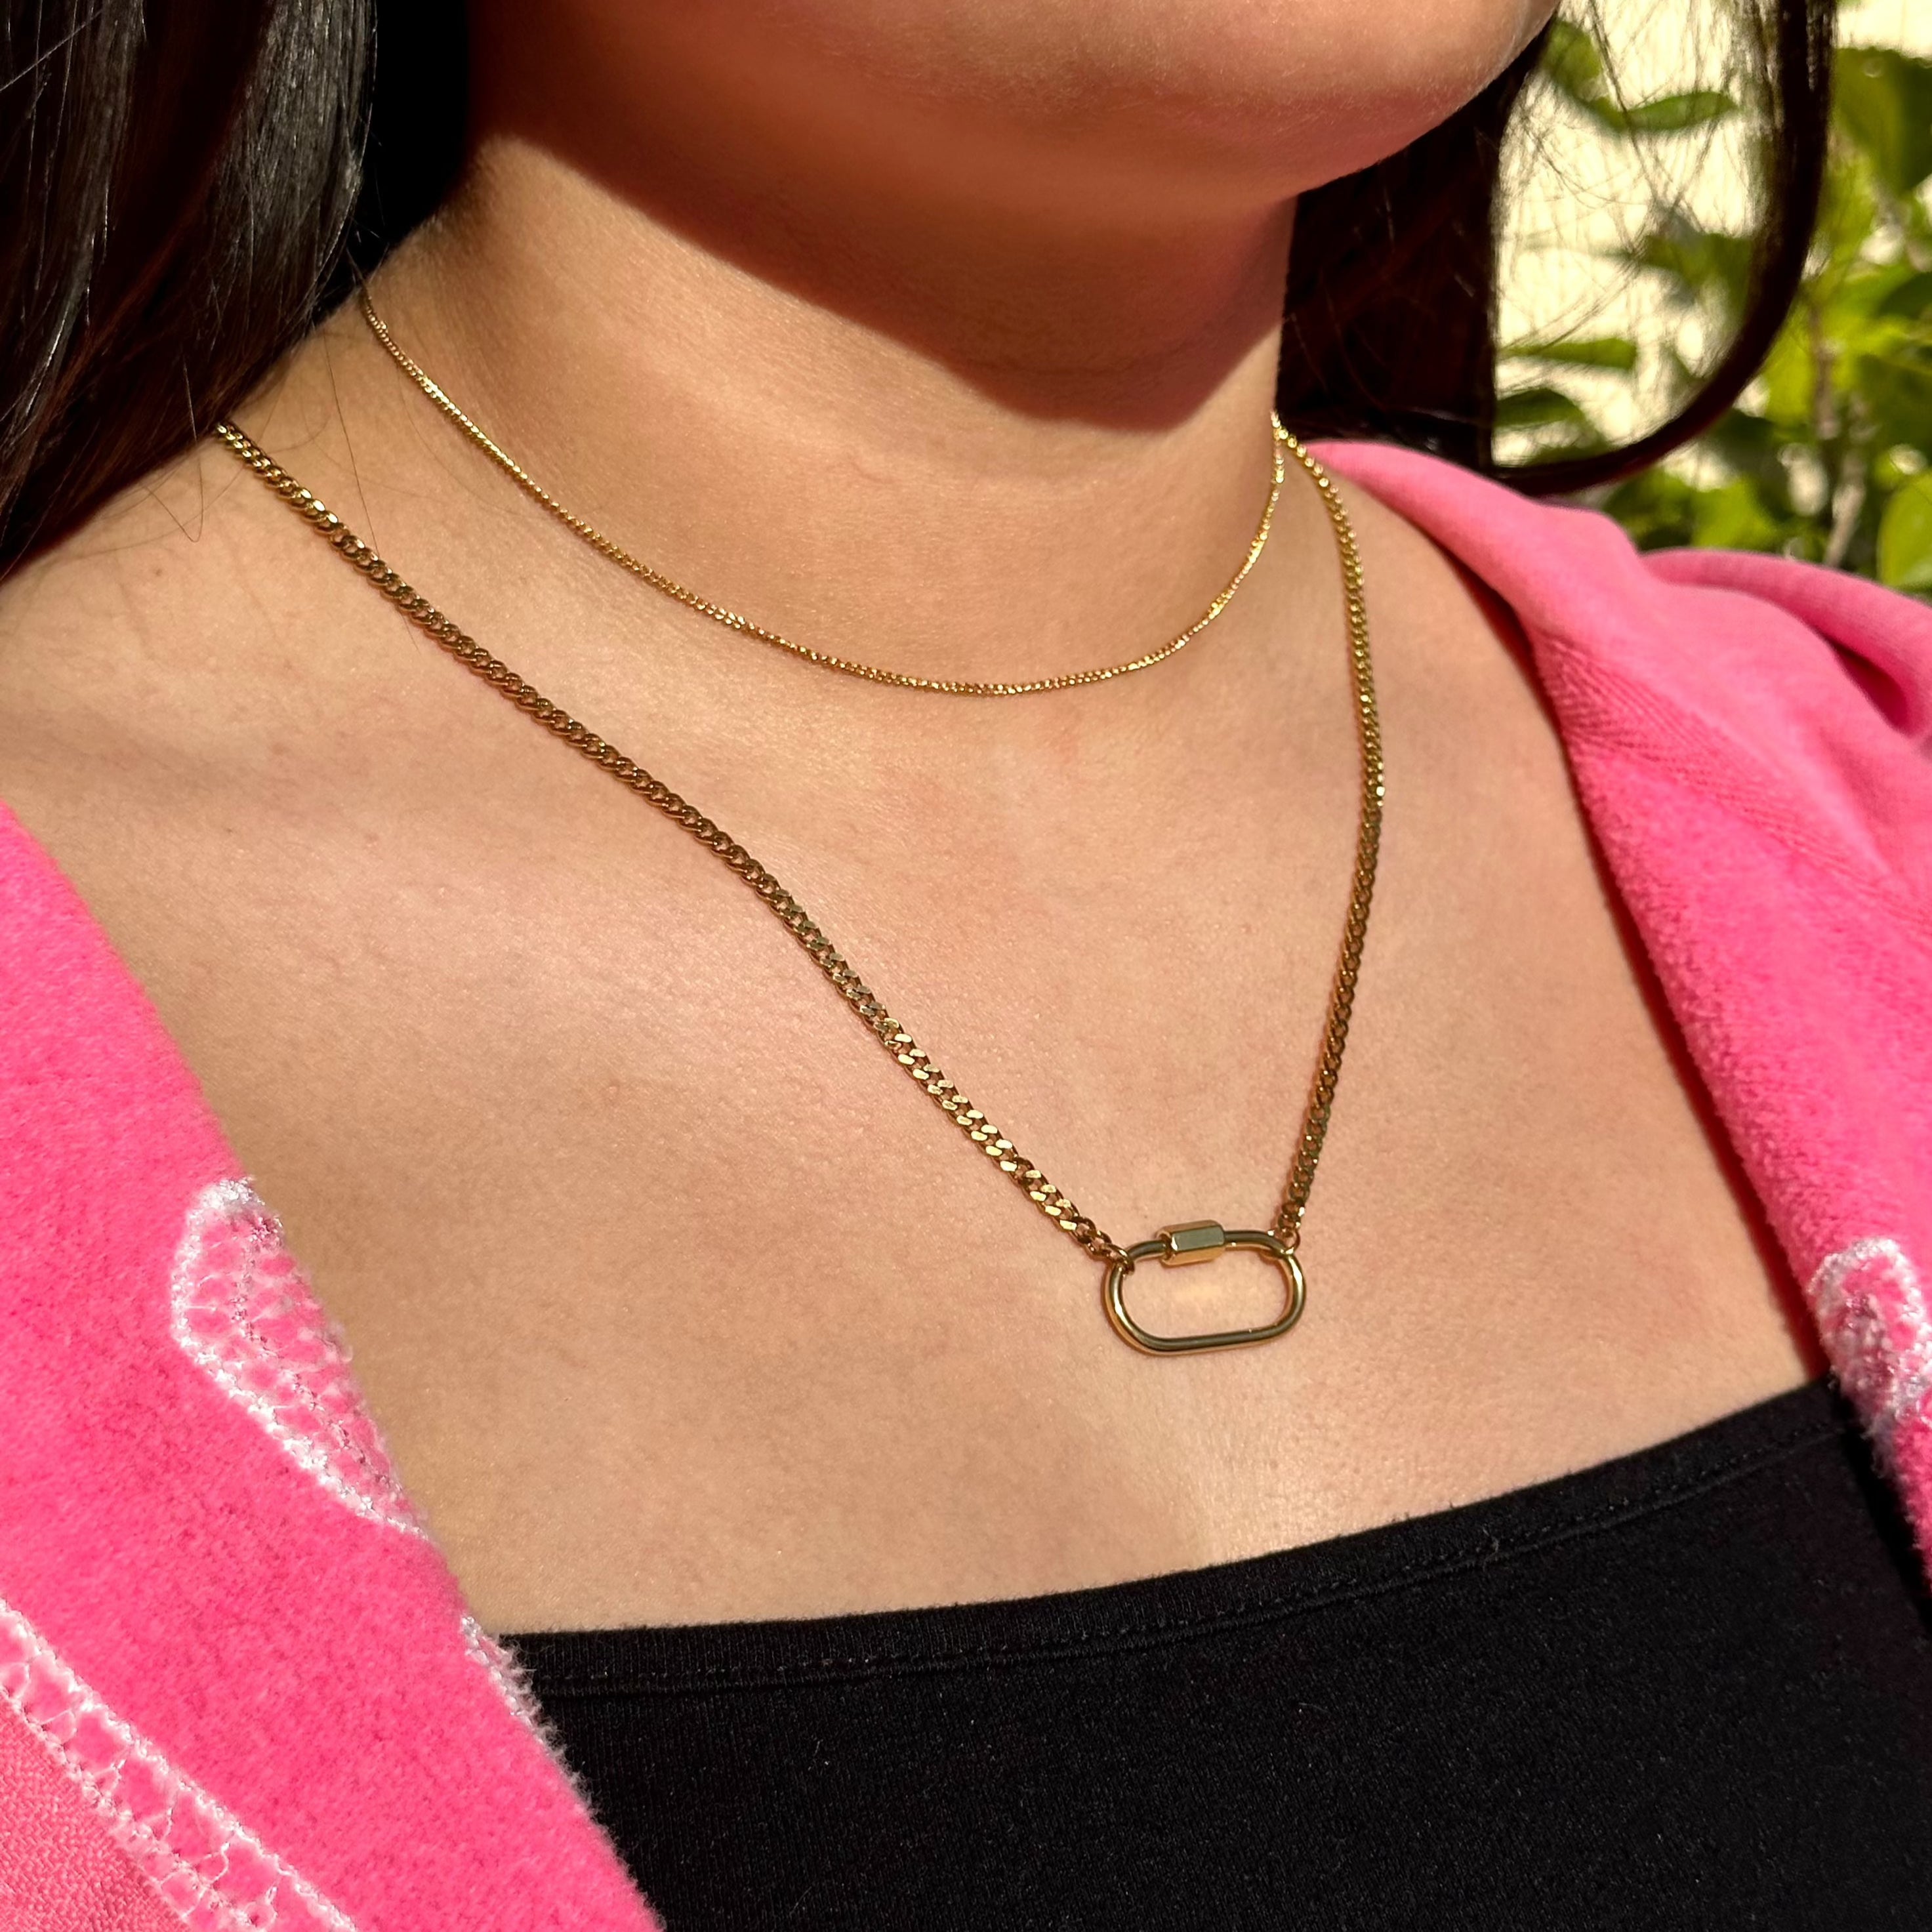 Carabiner Charm Lock Necklace